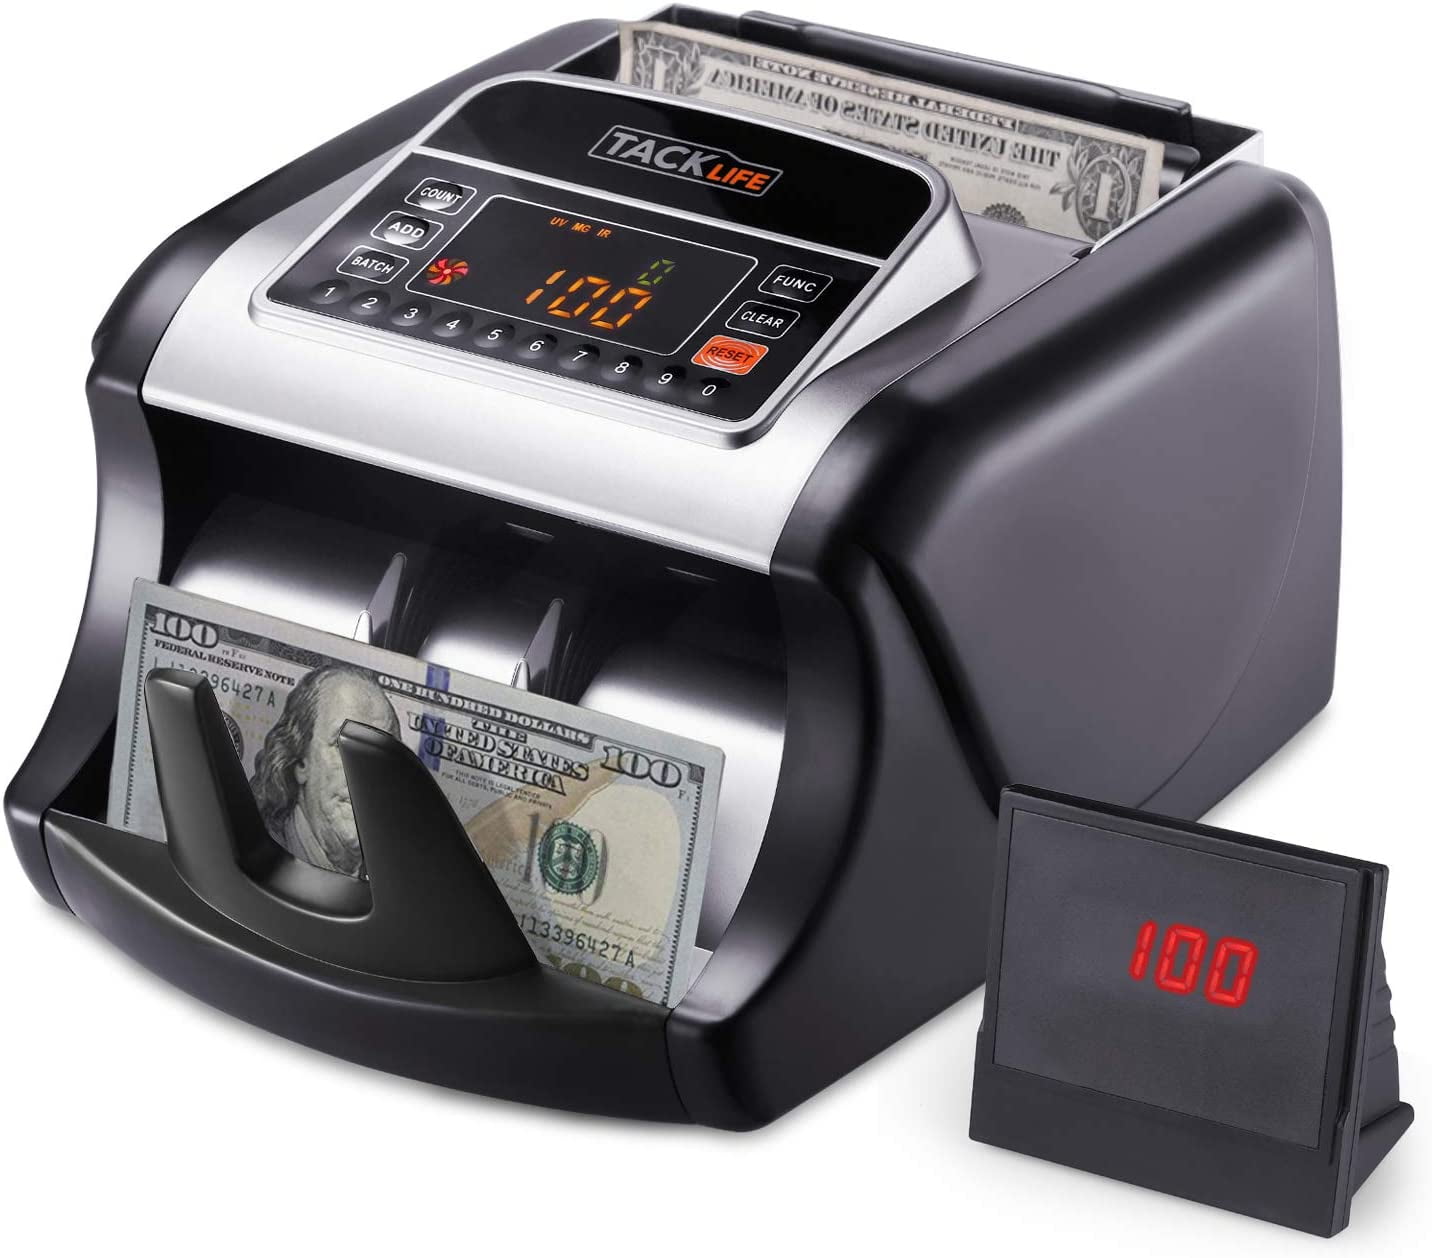 Rechargeable Bill Counting Machine External Display Batch Modes Value Counting Bill Counter USD Money Counter with Counterfeit Bill Detection LED Display UV/MG/IR Detection MMC03 Black 